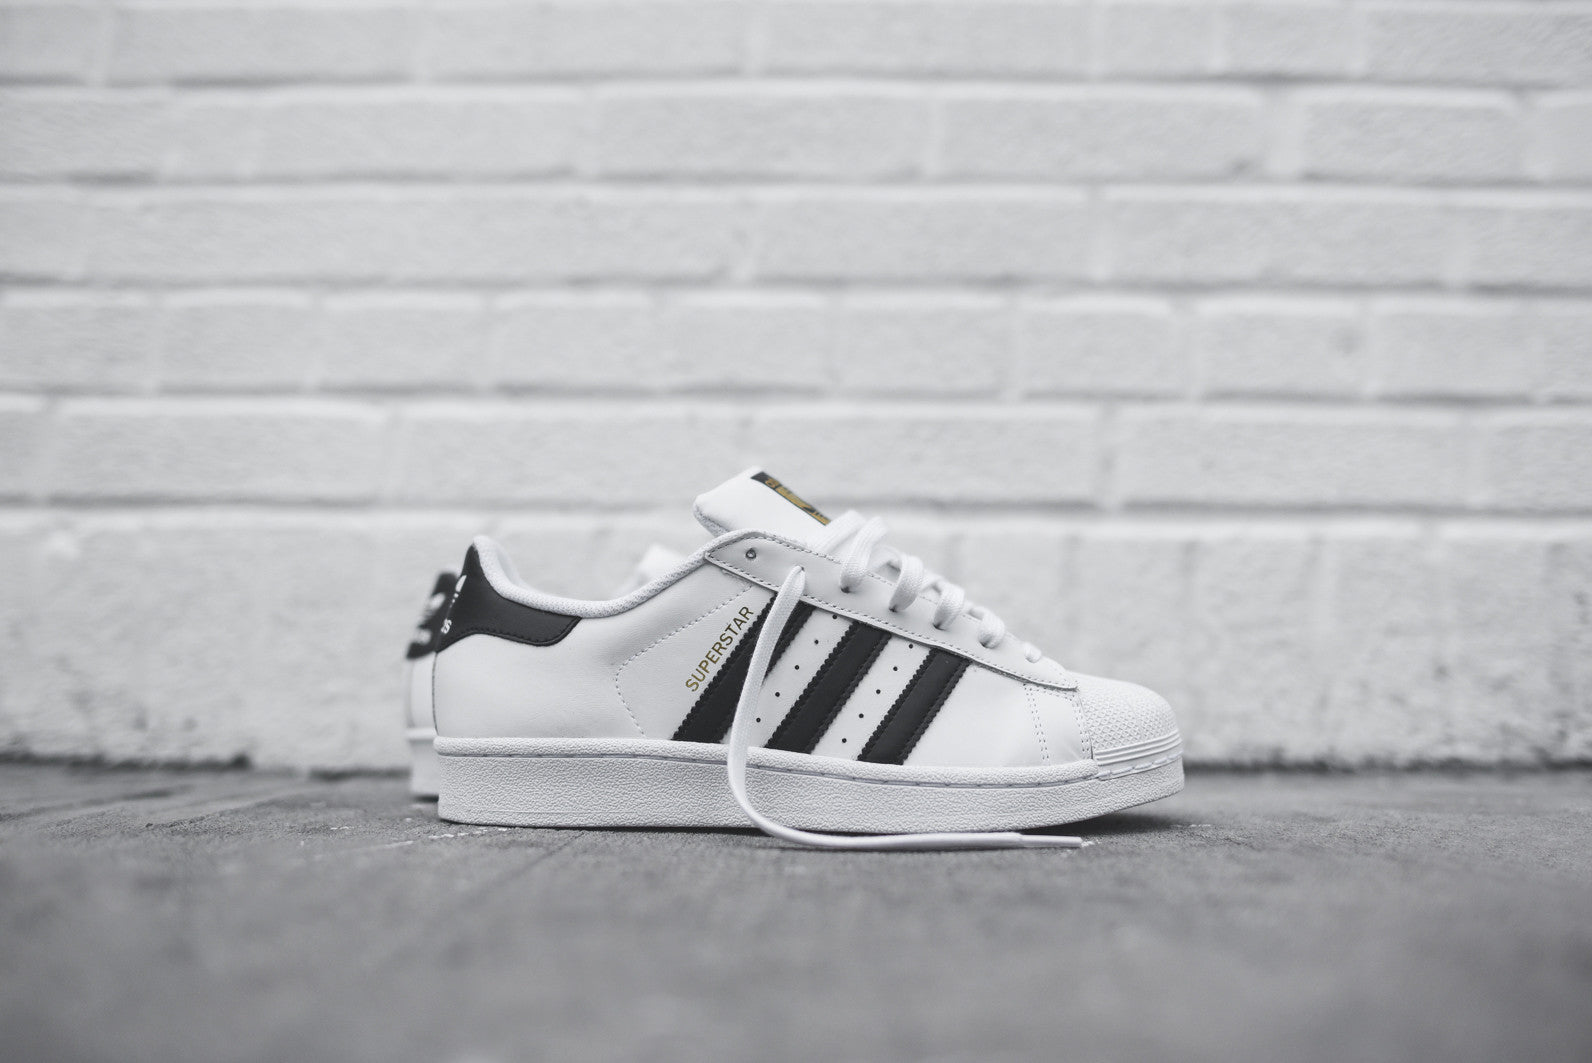 adidas Superstar Up Strap Womens Carbon/Carbon/Black from 